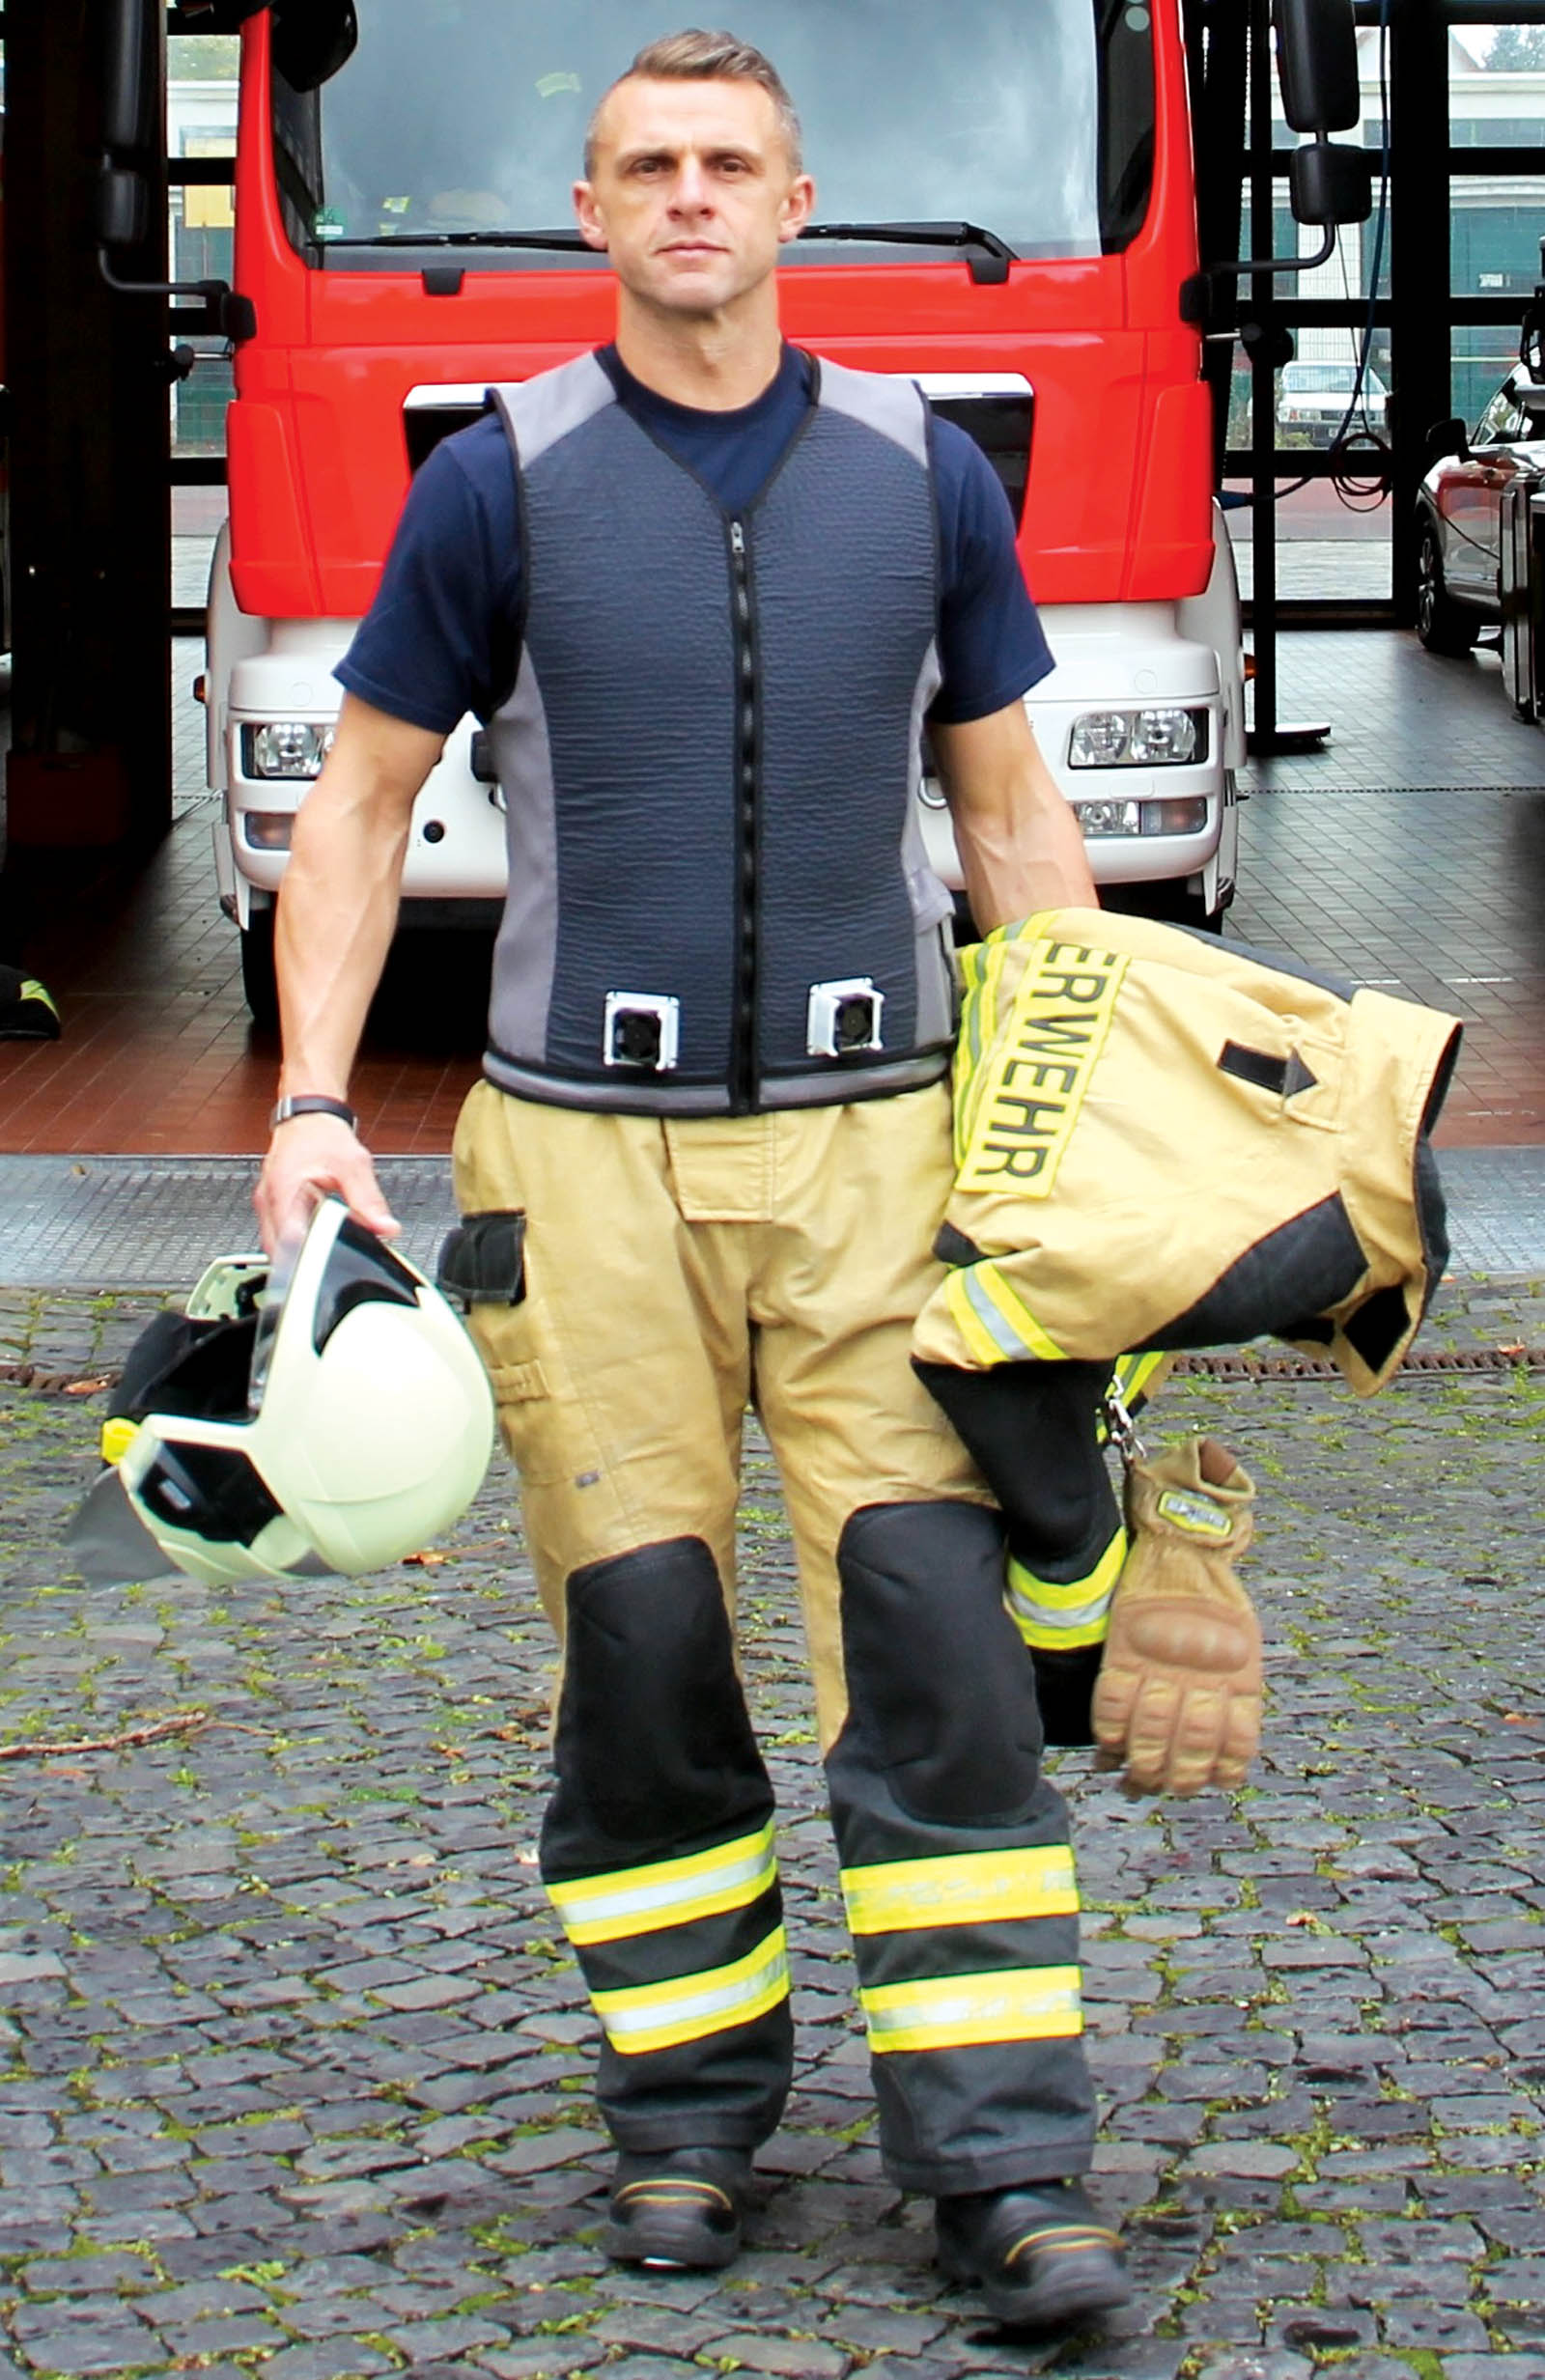 Cooling vest for firefighters - Specialty Fabrics Review